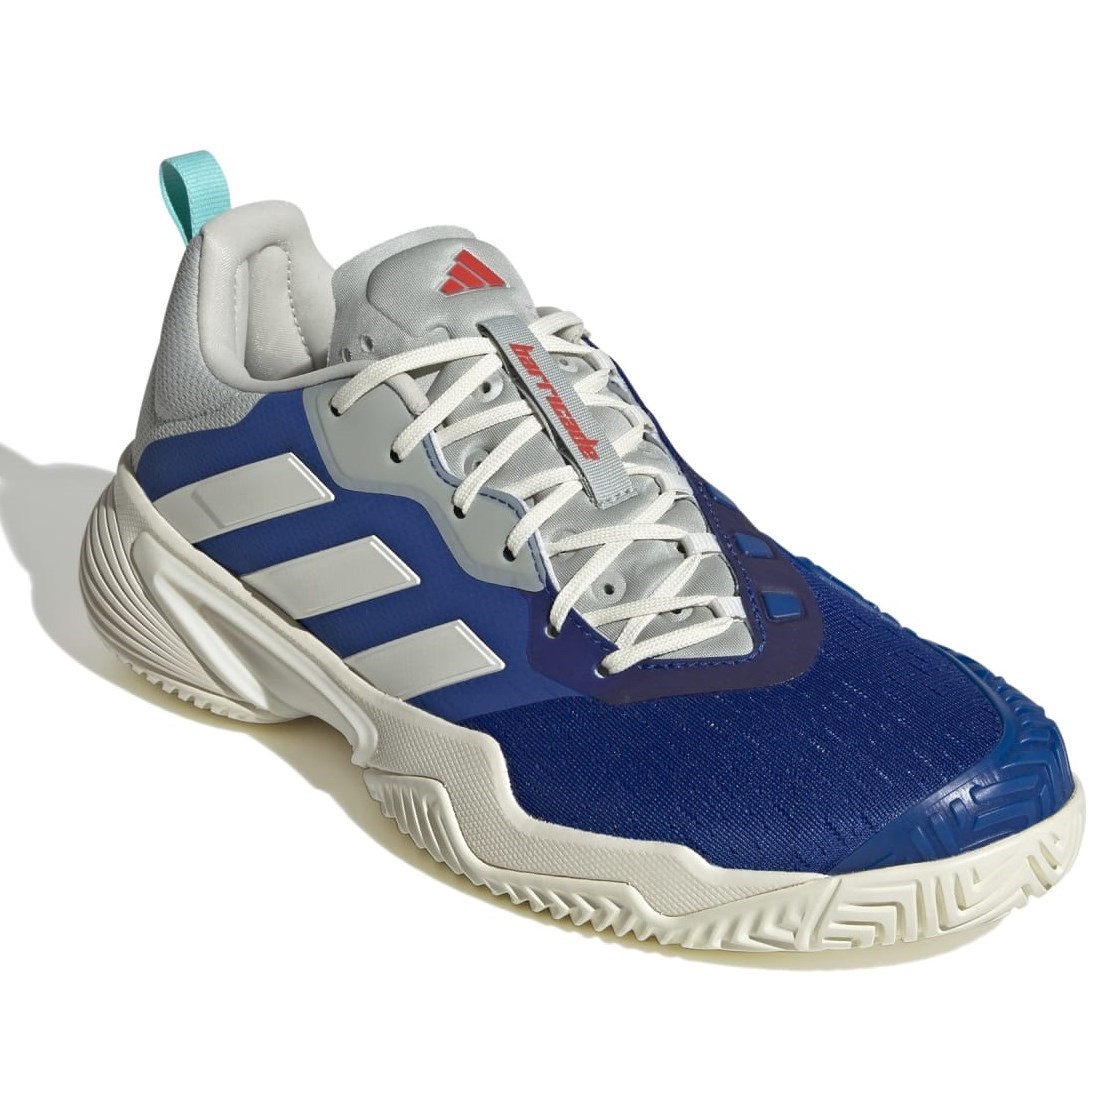 Adidas Barricade - Mens Tennis Shoes - Royal Blue/Off White/Bright Red ...